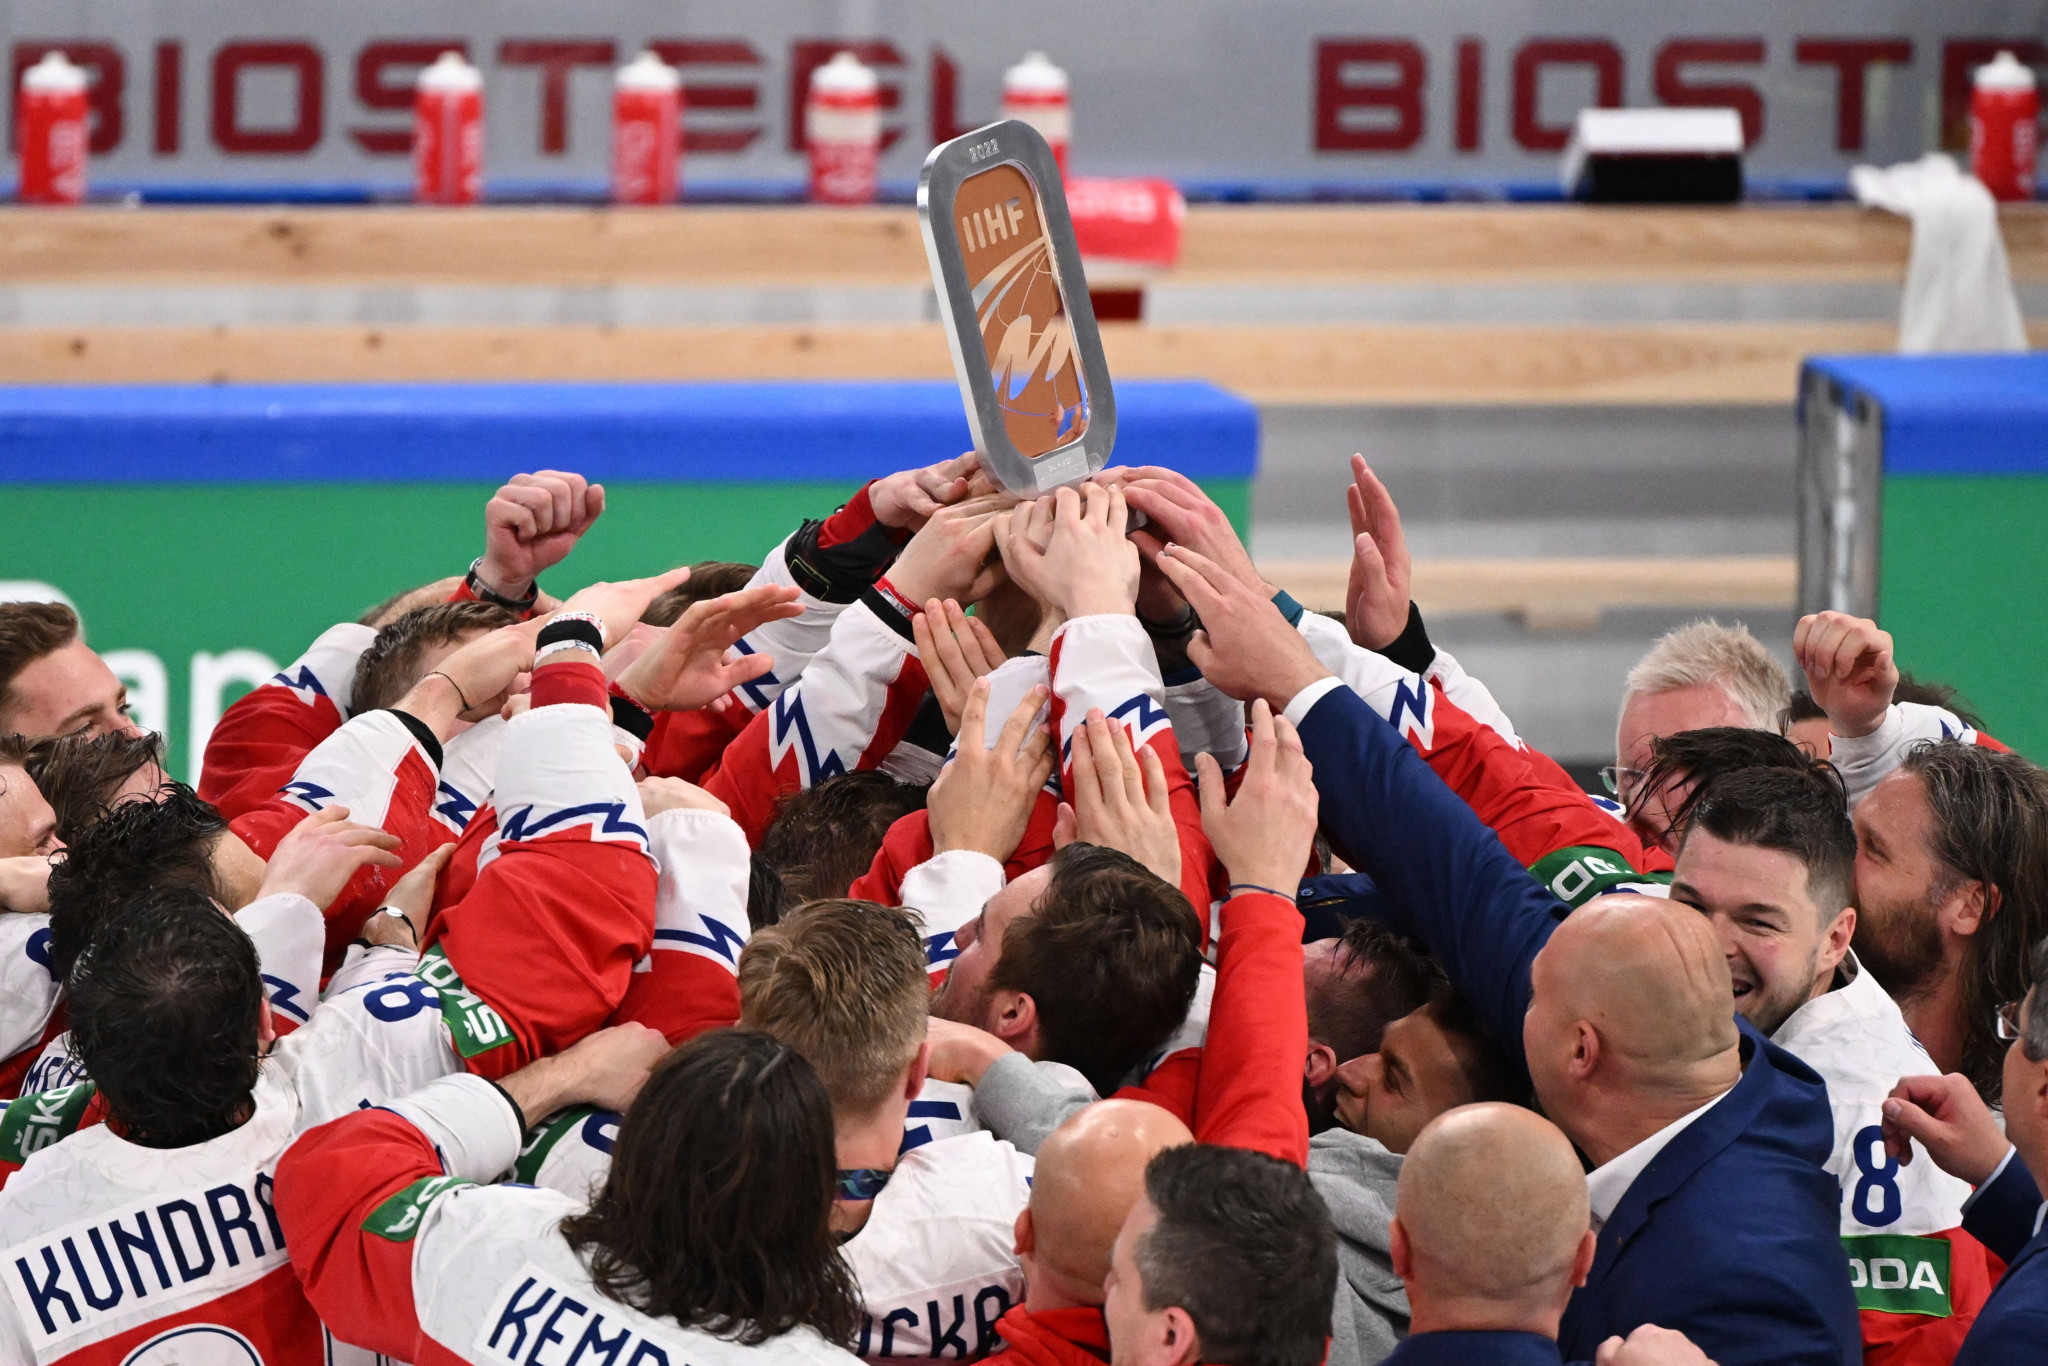 Czech Republic claimed bronze with a convincing win over the United States ©Getty Images